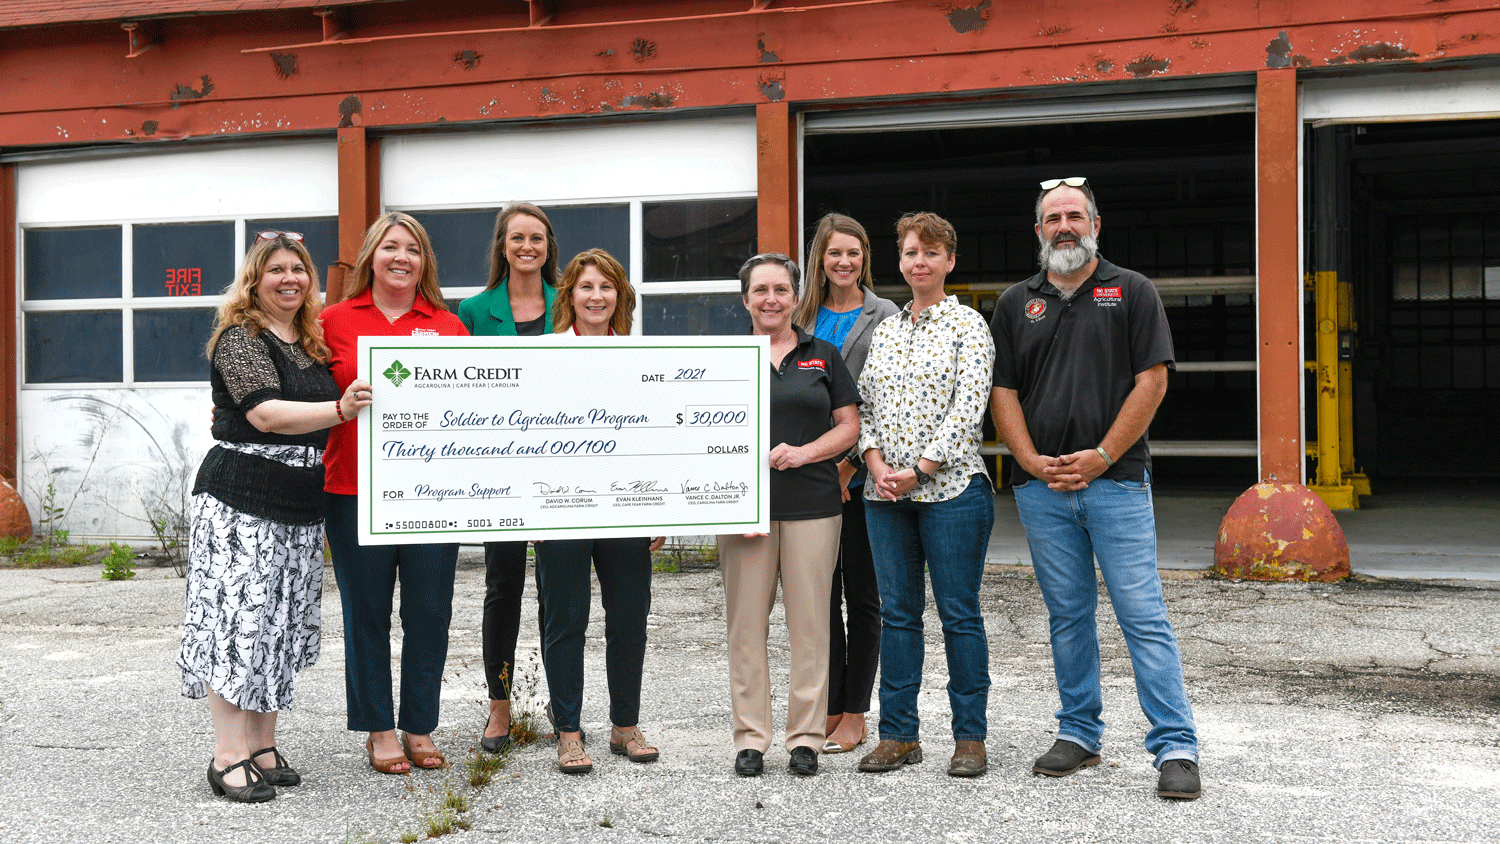 Farm Credit presenting a check to NC State's Soldier to Agriculture program